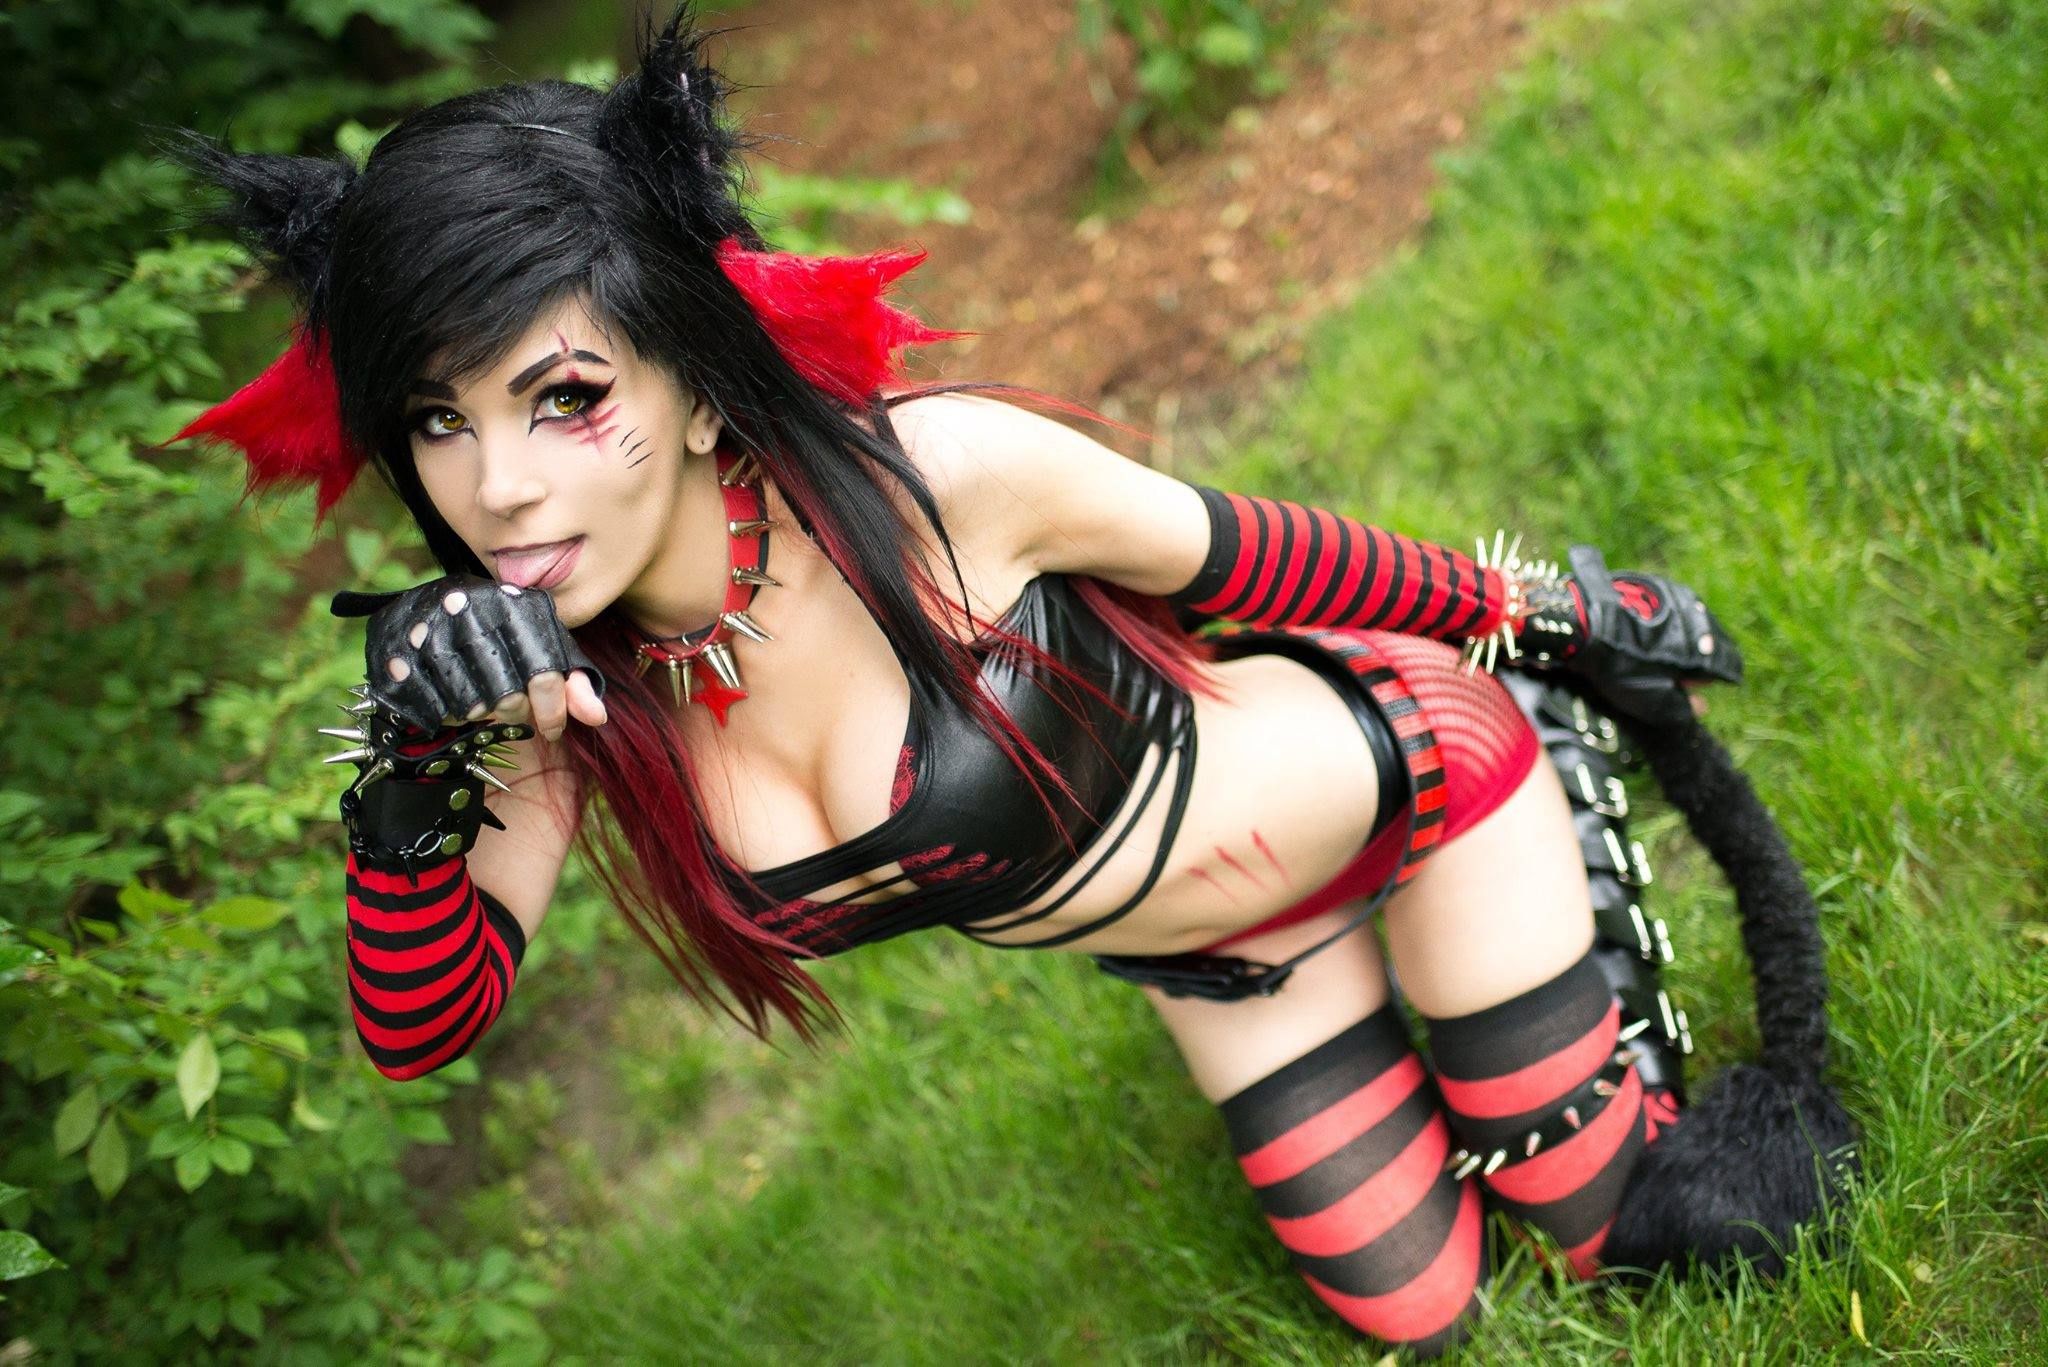 20+ Sexy Photos Of Cosplay Girls